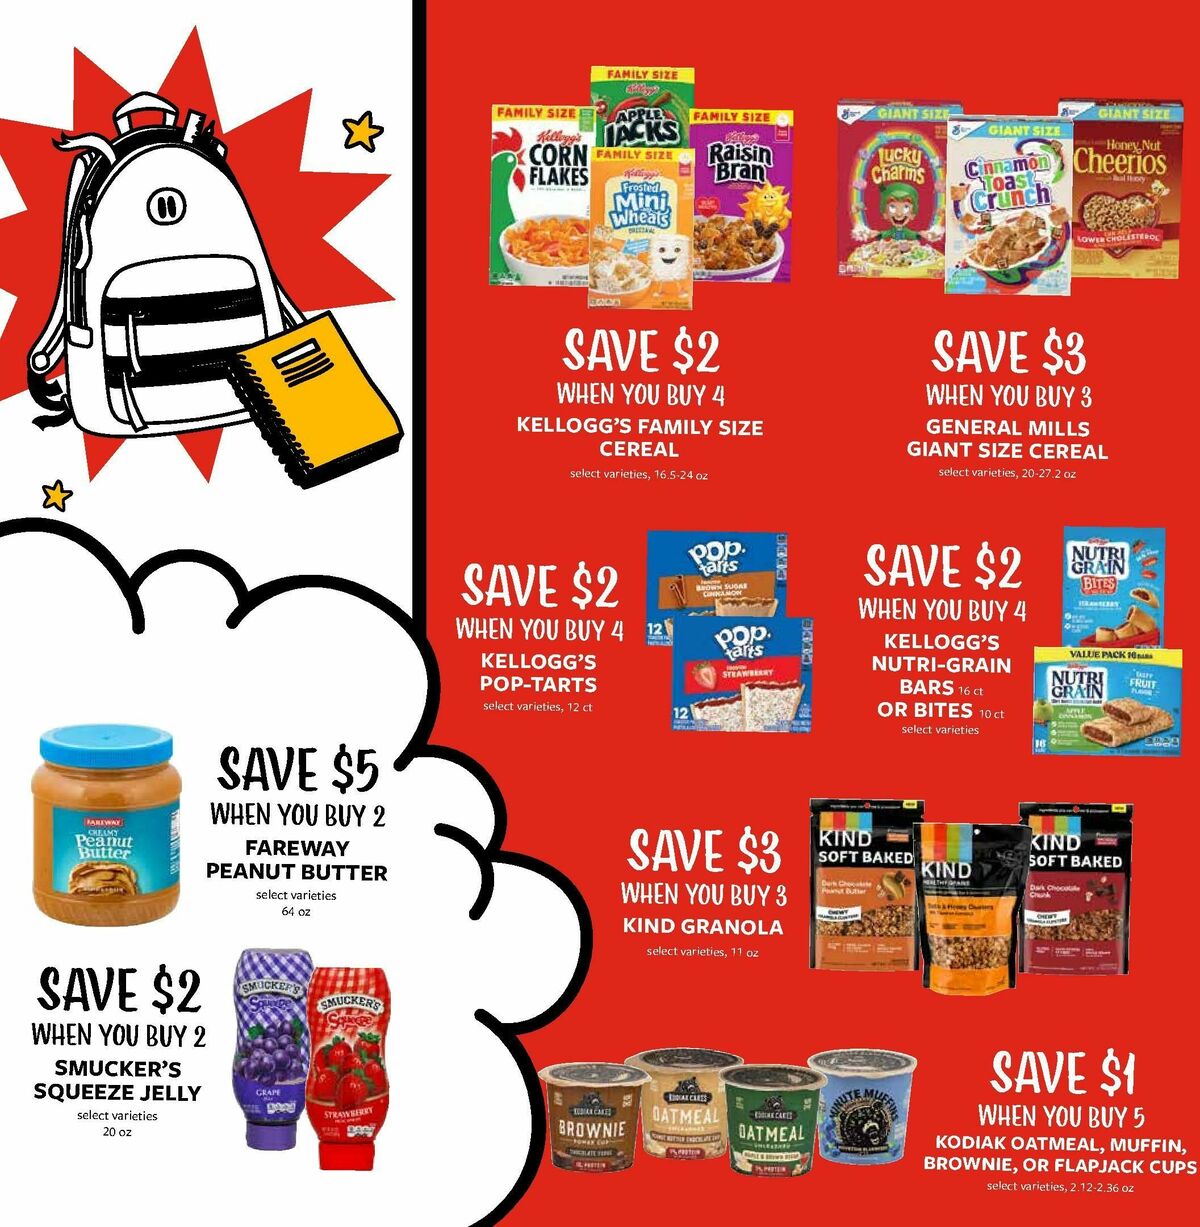 Fareway Weekly Ad from July 31